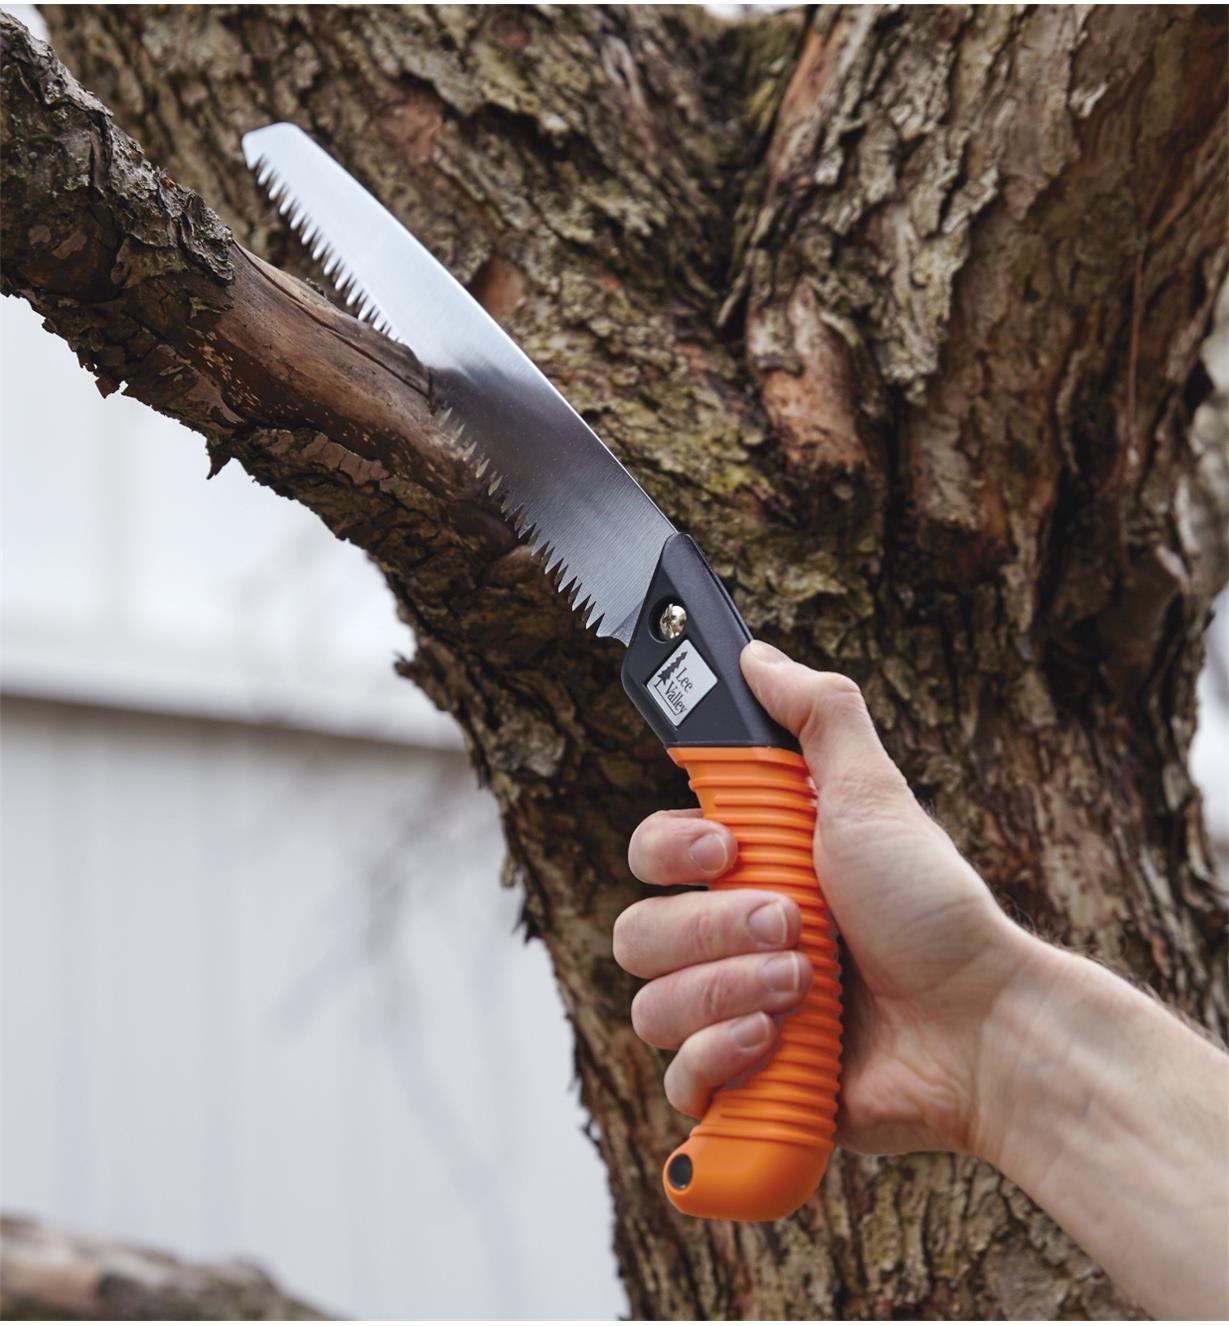 Using the Pruning Saw to cut a tree branch